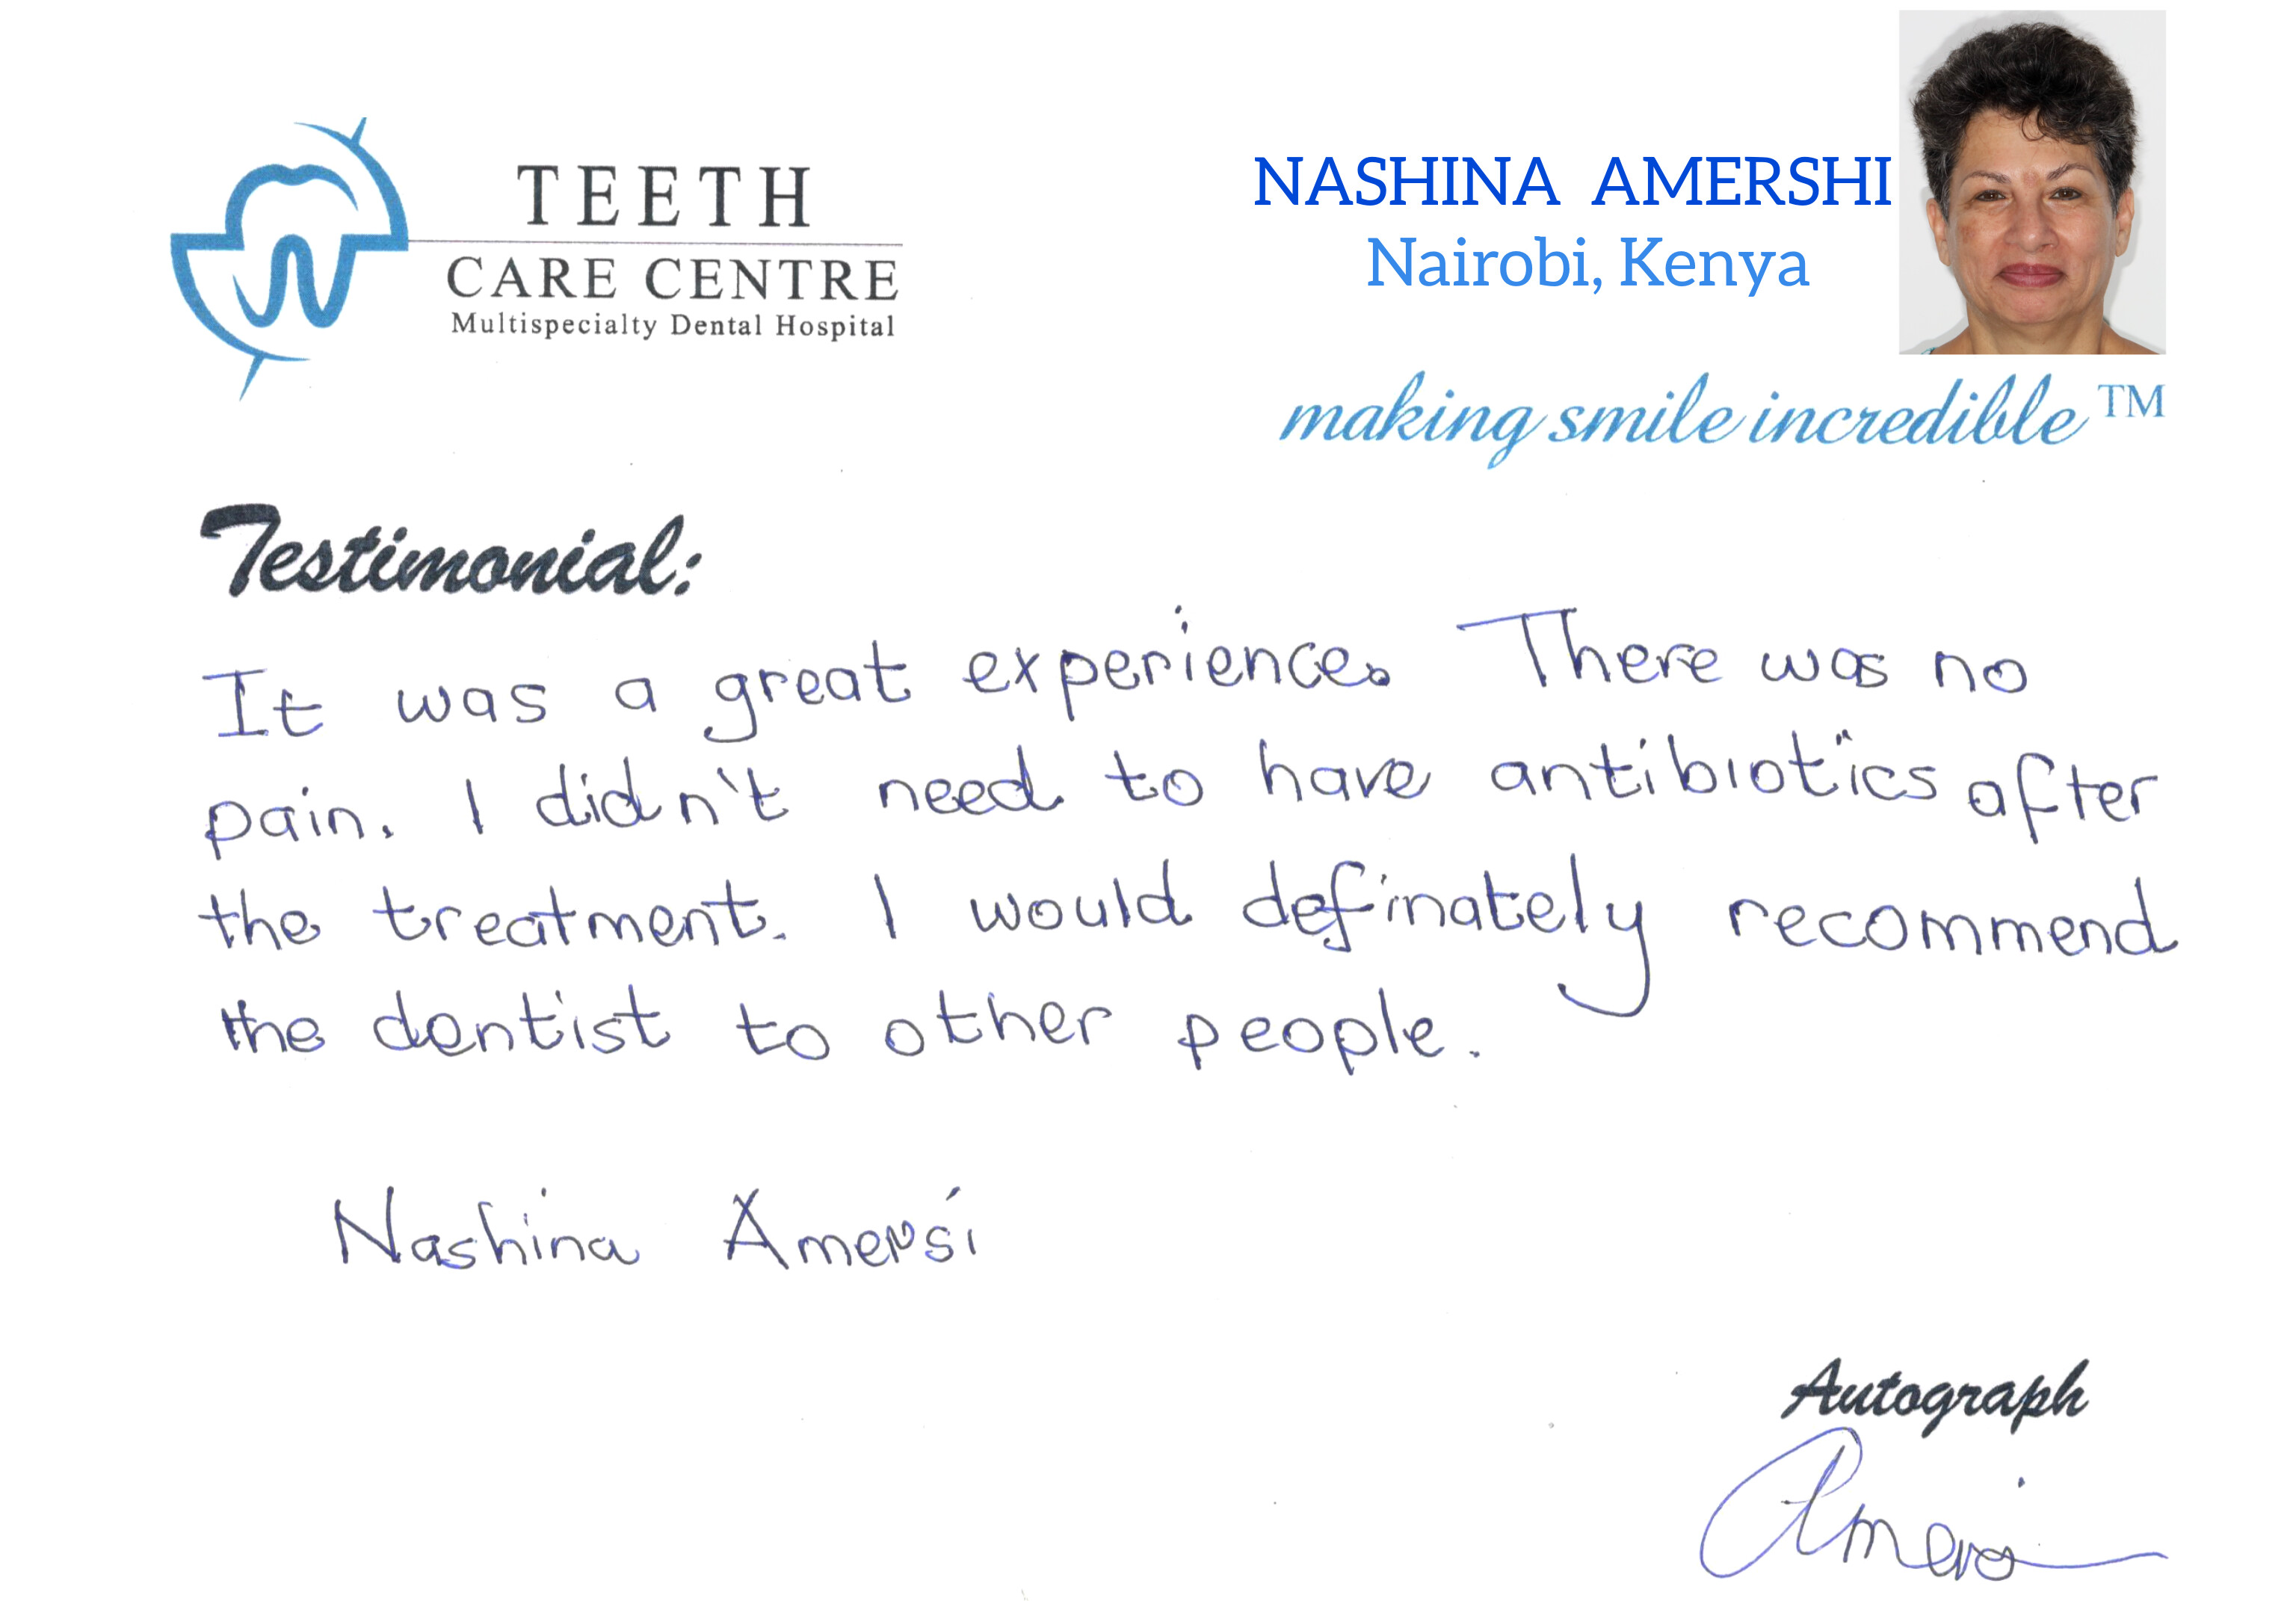 abroad patient testimonial review dental implant treatment in india best implant dental hospital